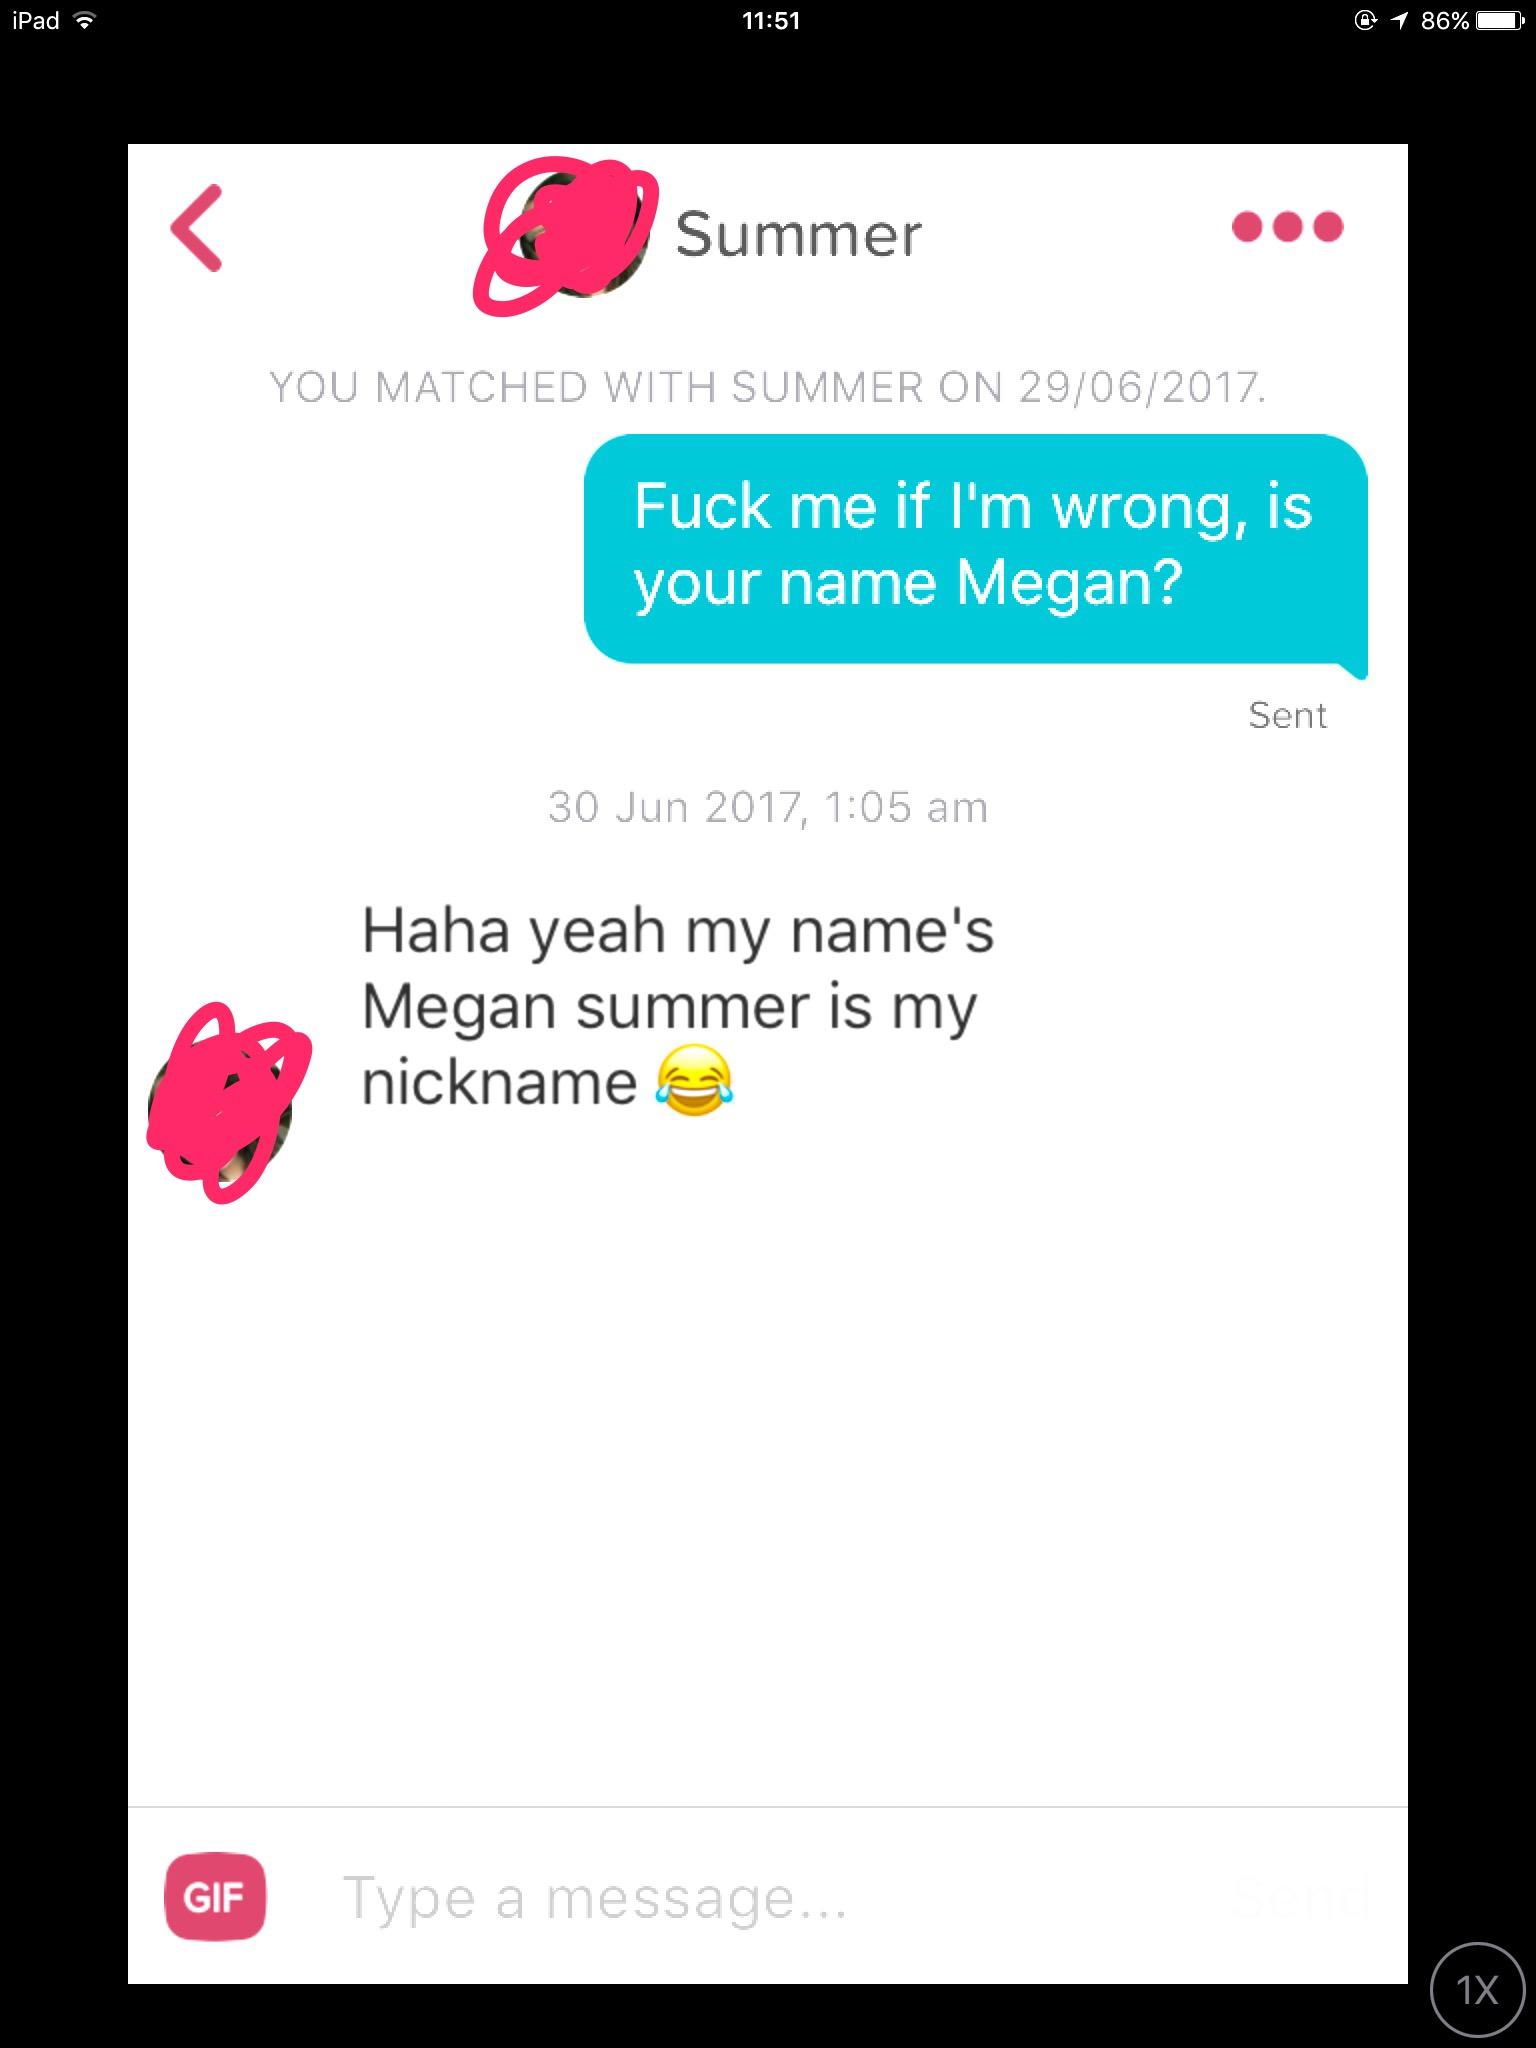 fuck off tinder - iPad @ 1 86% O Summer You Matched With Summer On 29062017 Fuck me if I'm wrong, is your name Megan? Sent , Haha yeah my name's Megan summer is my nickname Gif Type a message....